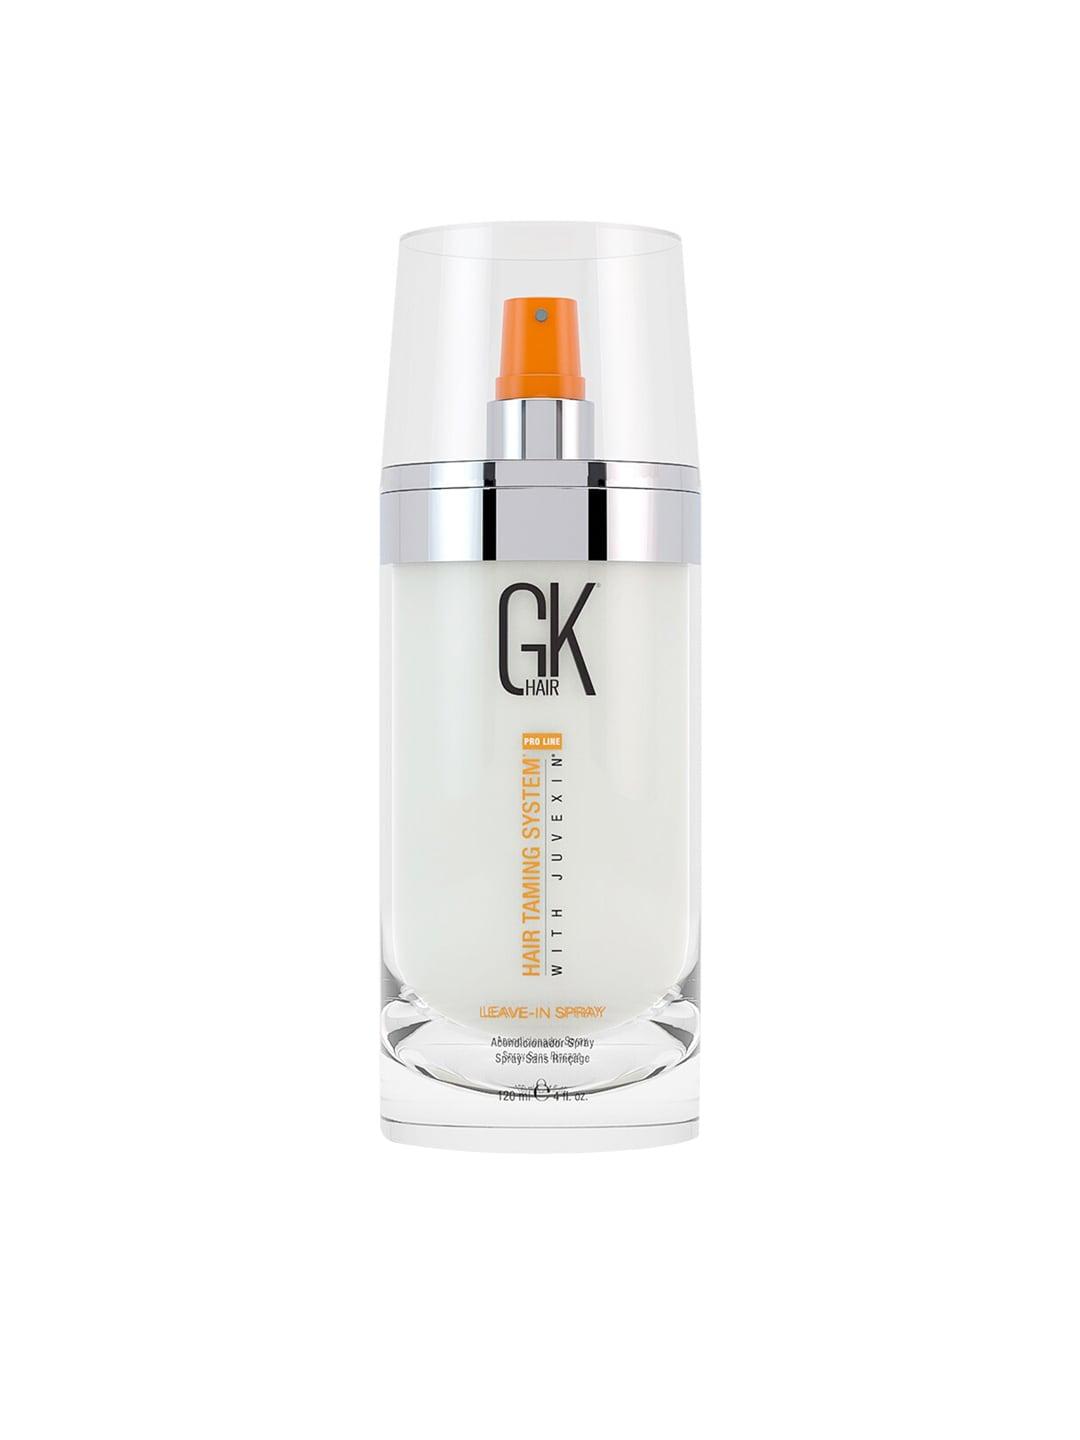 GK HAIR Hair Taming System with Juvexin Leave-In Spray - 120 ml